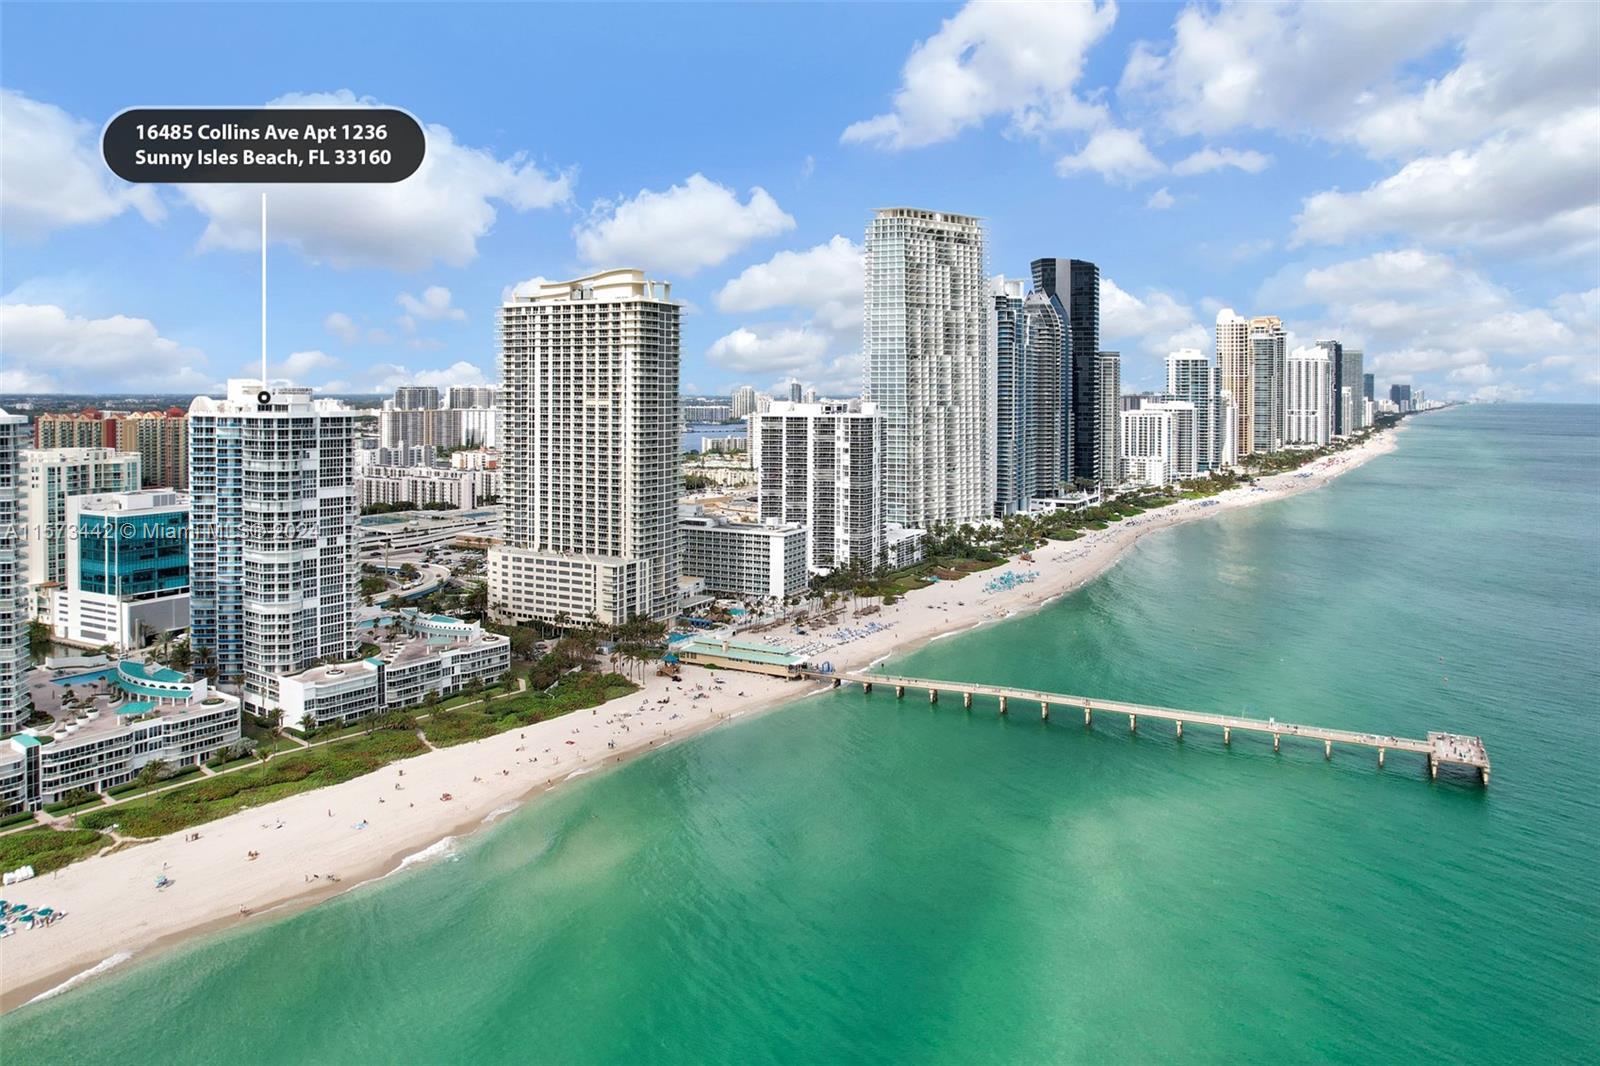 Photo of 16485 Collins Ave #1236 in Sunny Isles Beach, FL